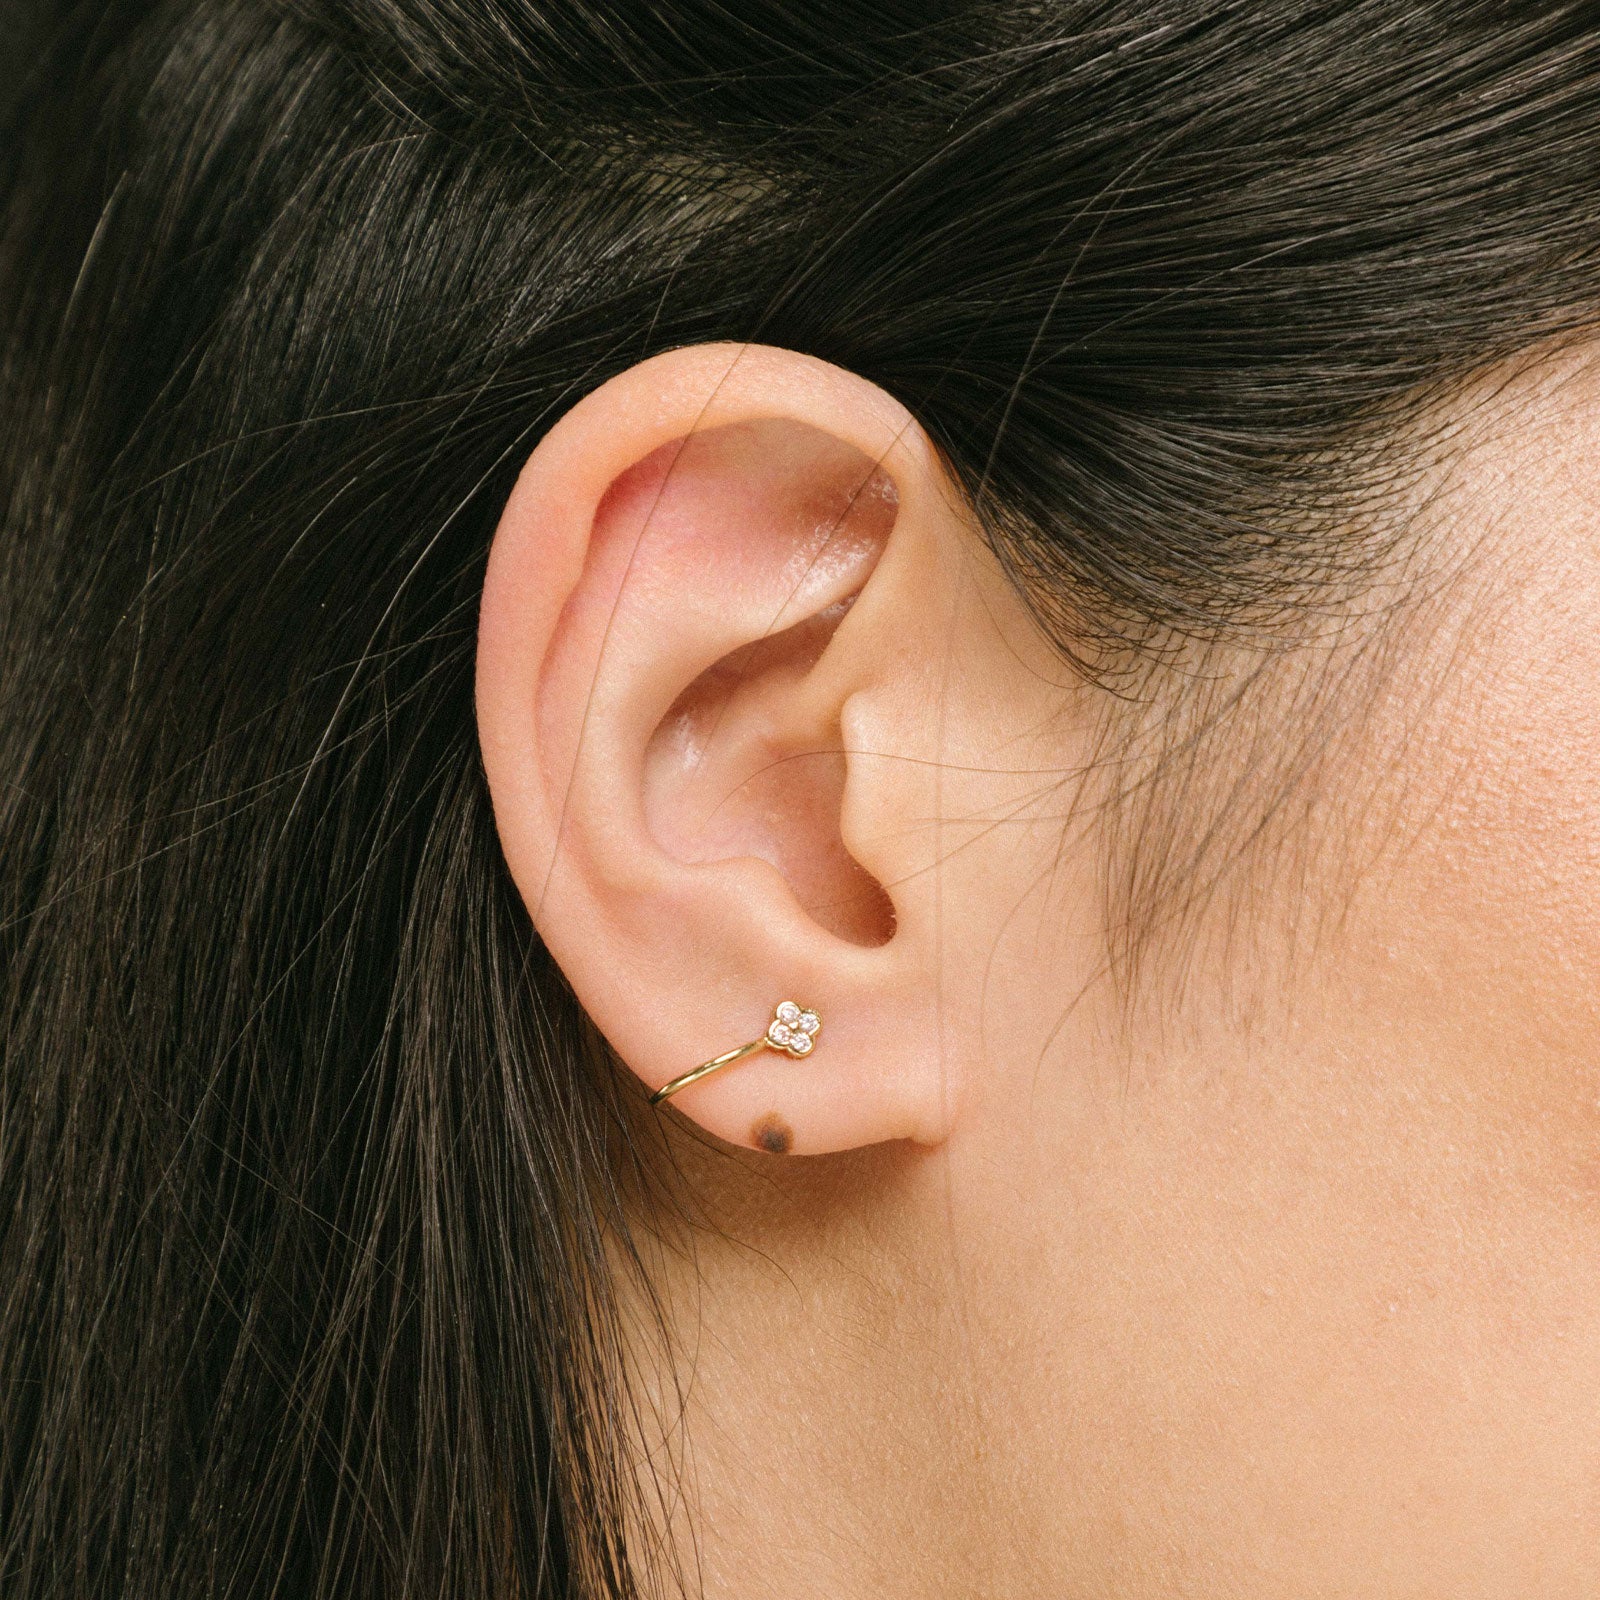 A model wearing our Gold Clover Ear Cuff, a chic and versatile accessory. Made from Gold or Silver Plated Copper alloy, this modern clover-shaped ear cuff features 4 sparkling Cubic Zirconia stones. Ideal for both the nose and ear, it effortlessly adds sophistication to any outfit, allowing you to adorn yourself with style and flair.